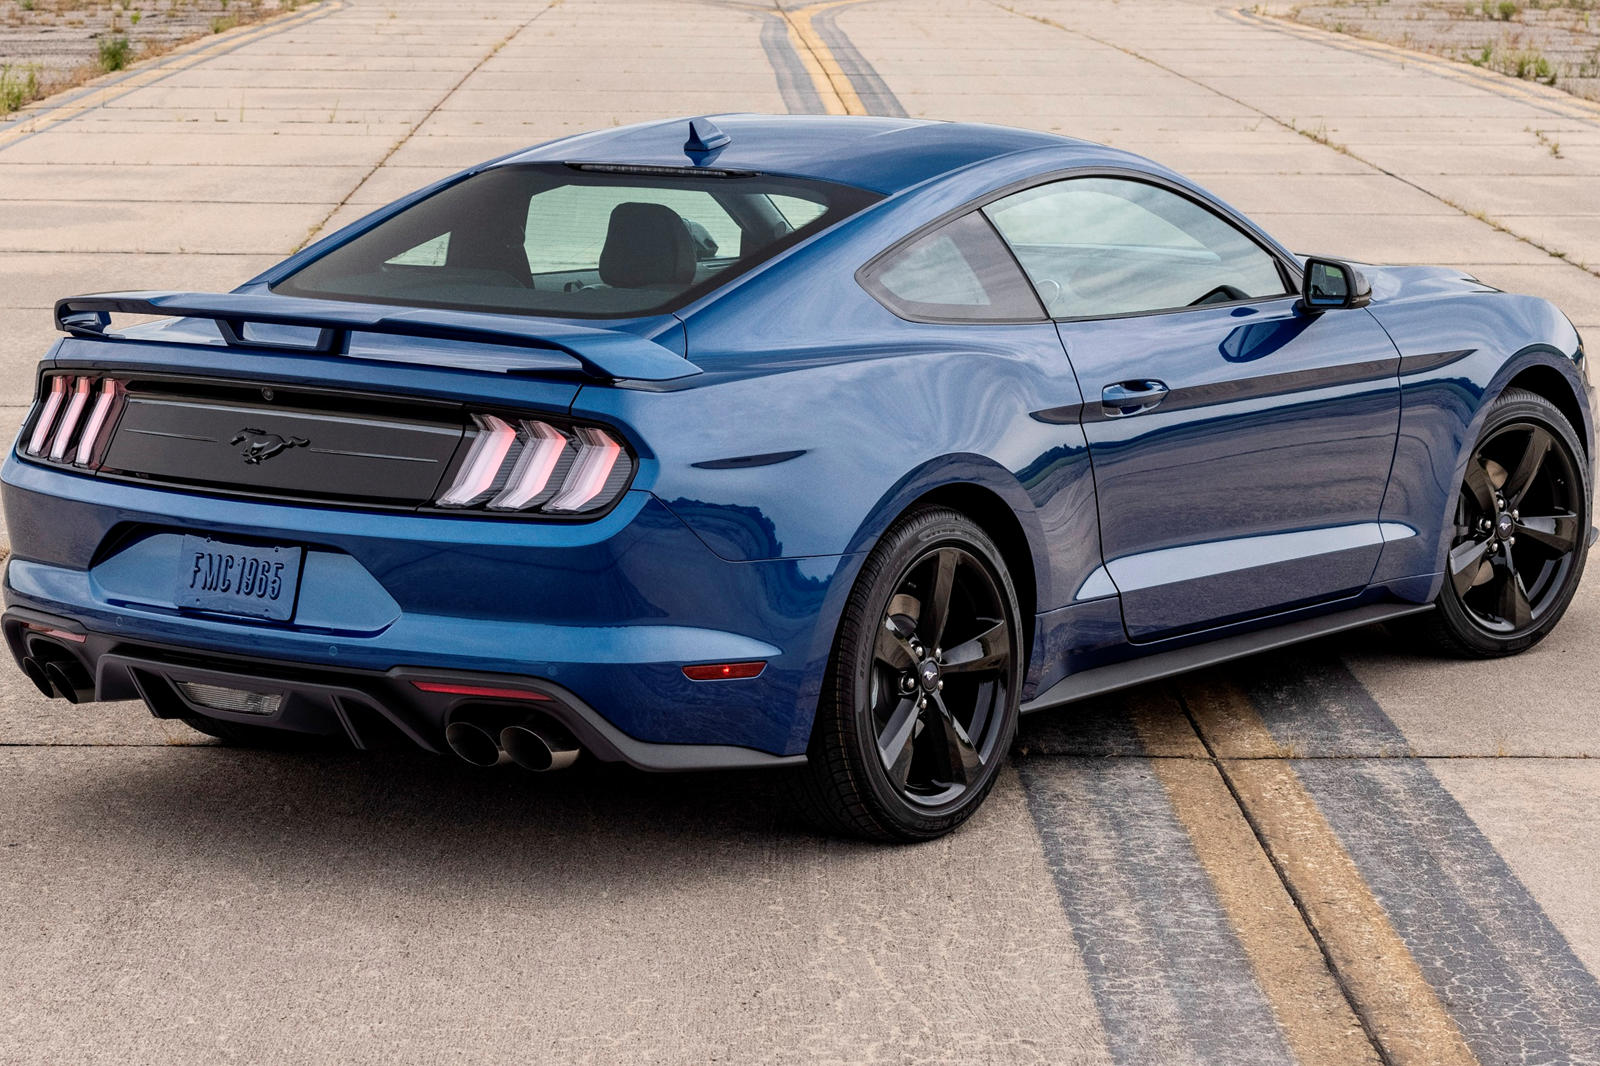 2021 Ford Mustang Coupe: Review, Trims, Specs, Price, New Interior ...